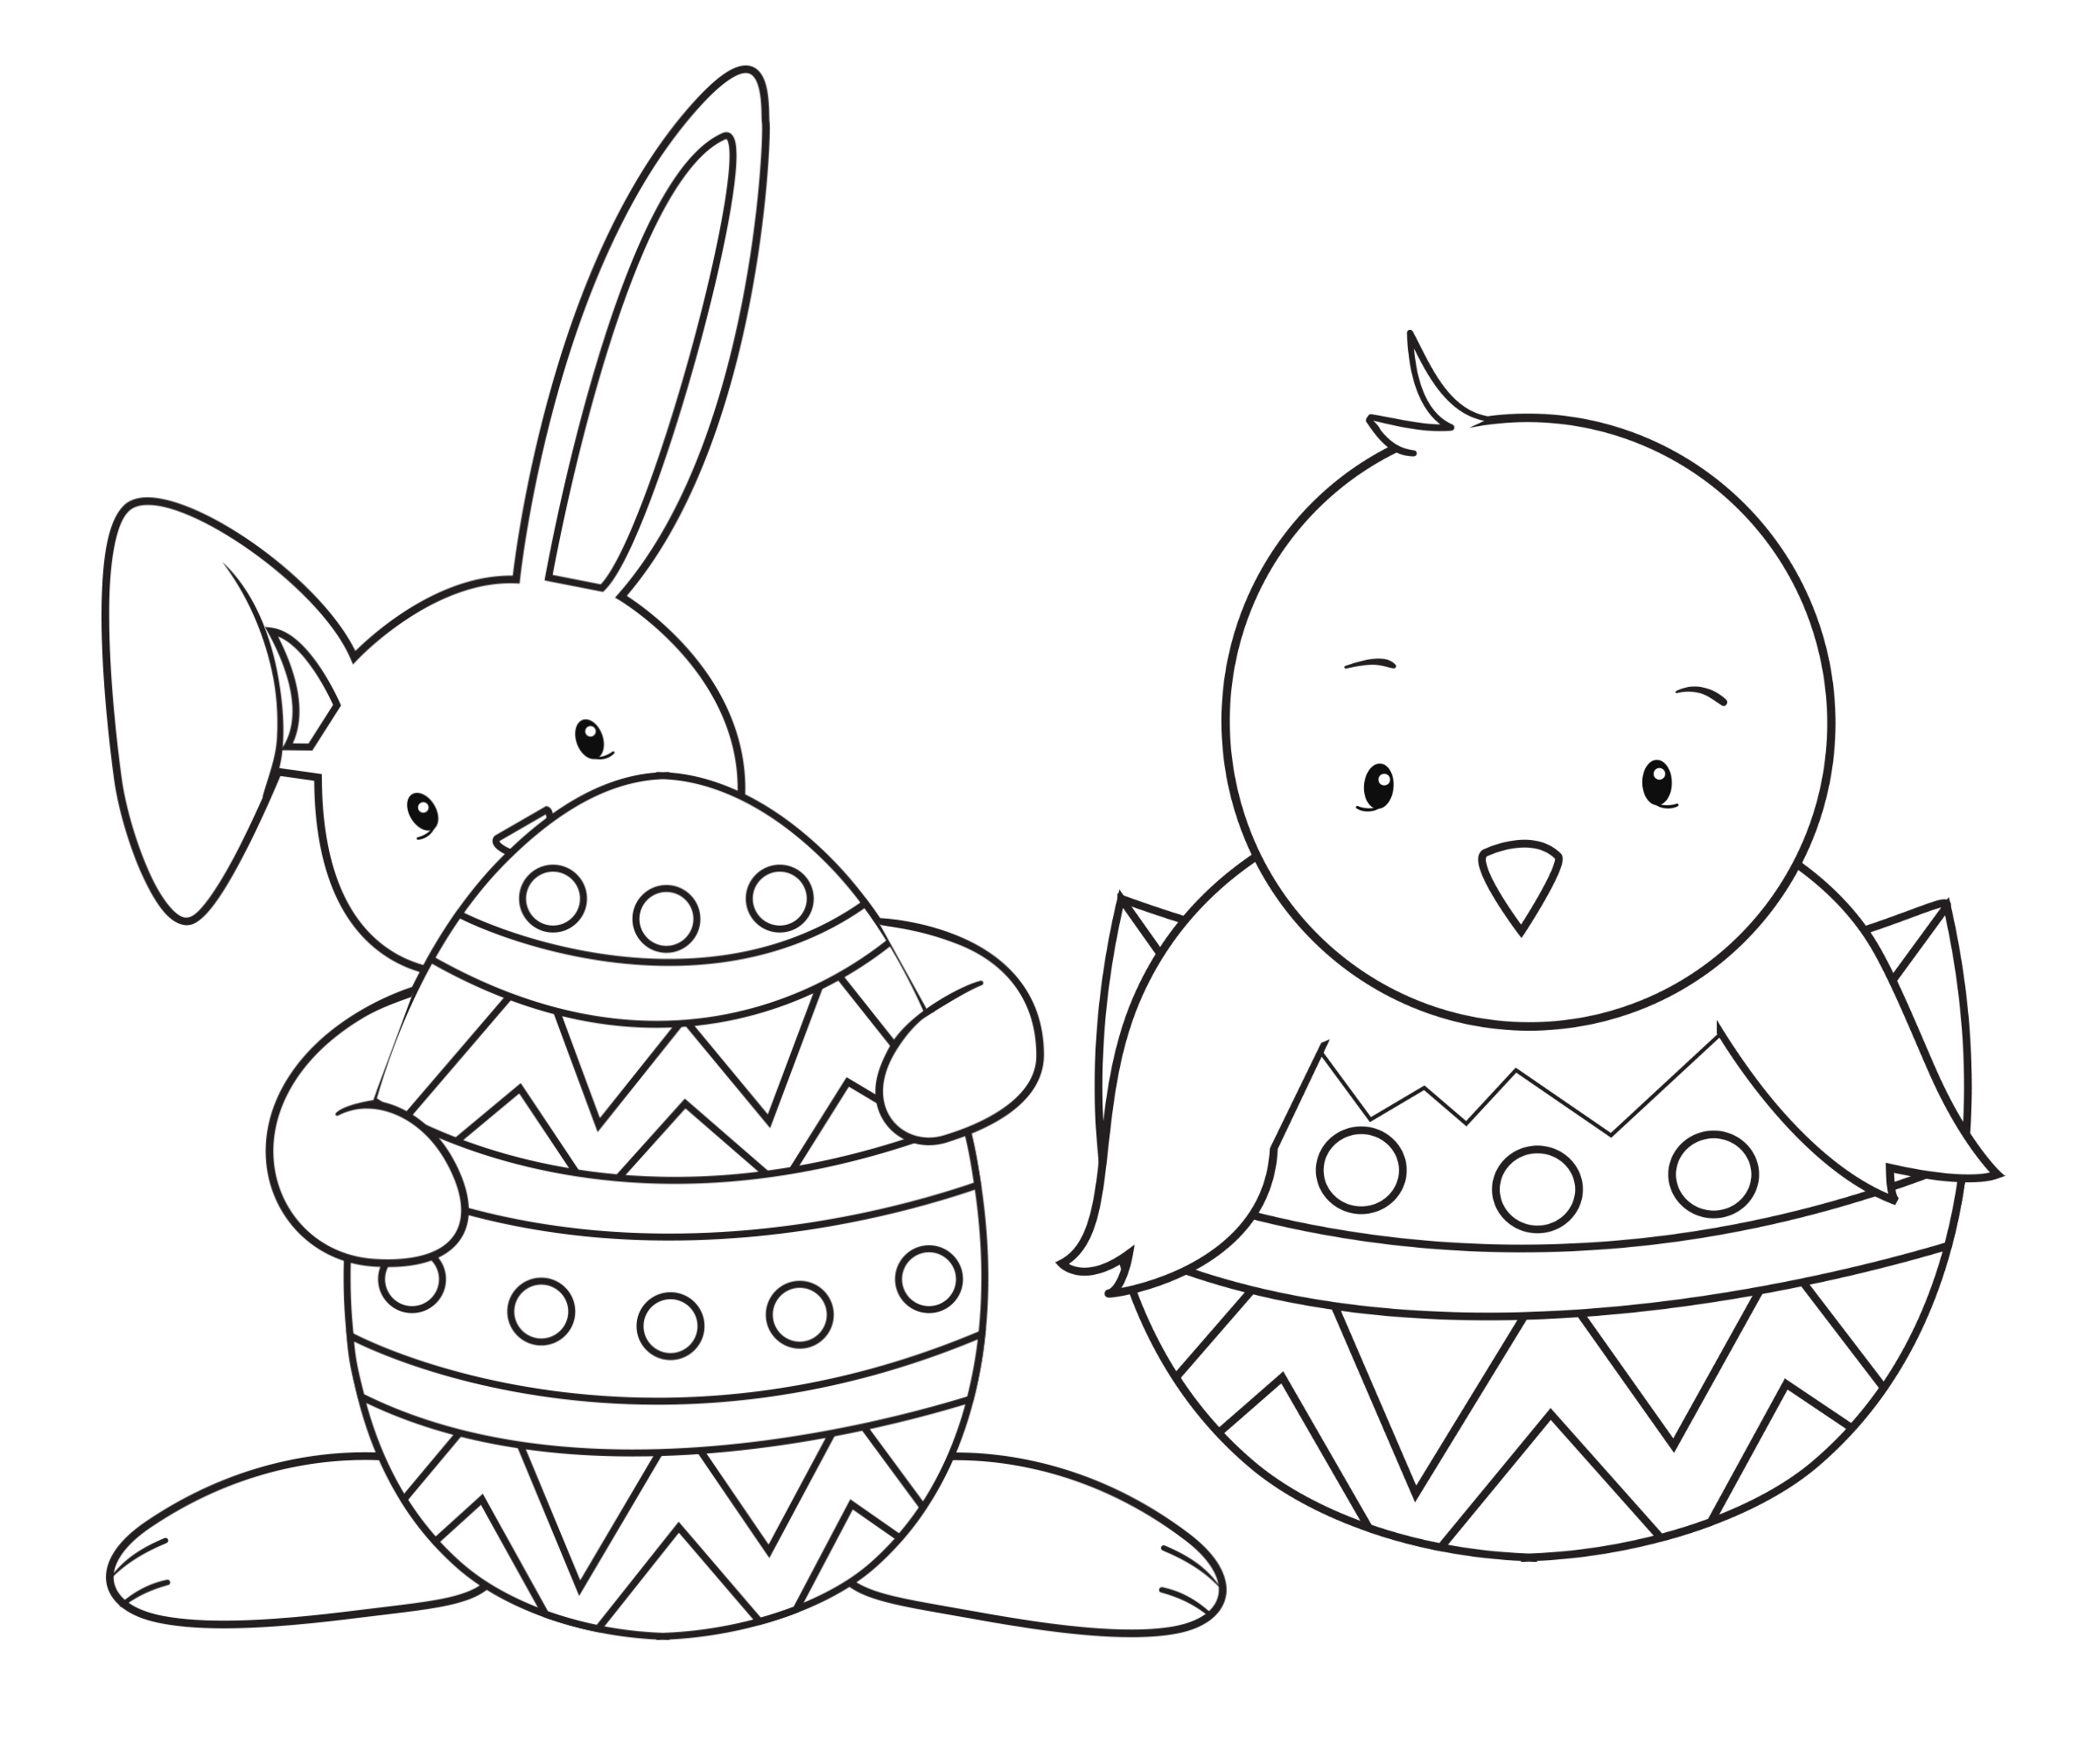 Easter Coloring Pages For Kids - Crazy Little Projects - Free Printable Easter Colouring Sheets